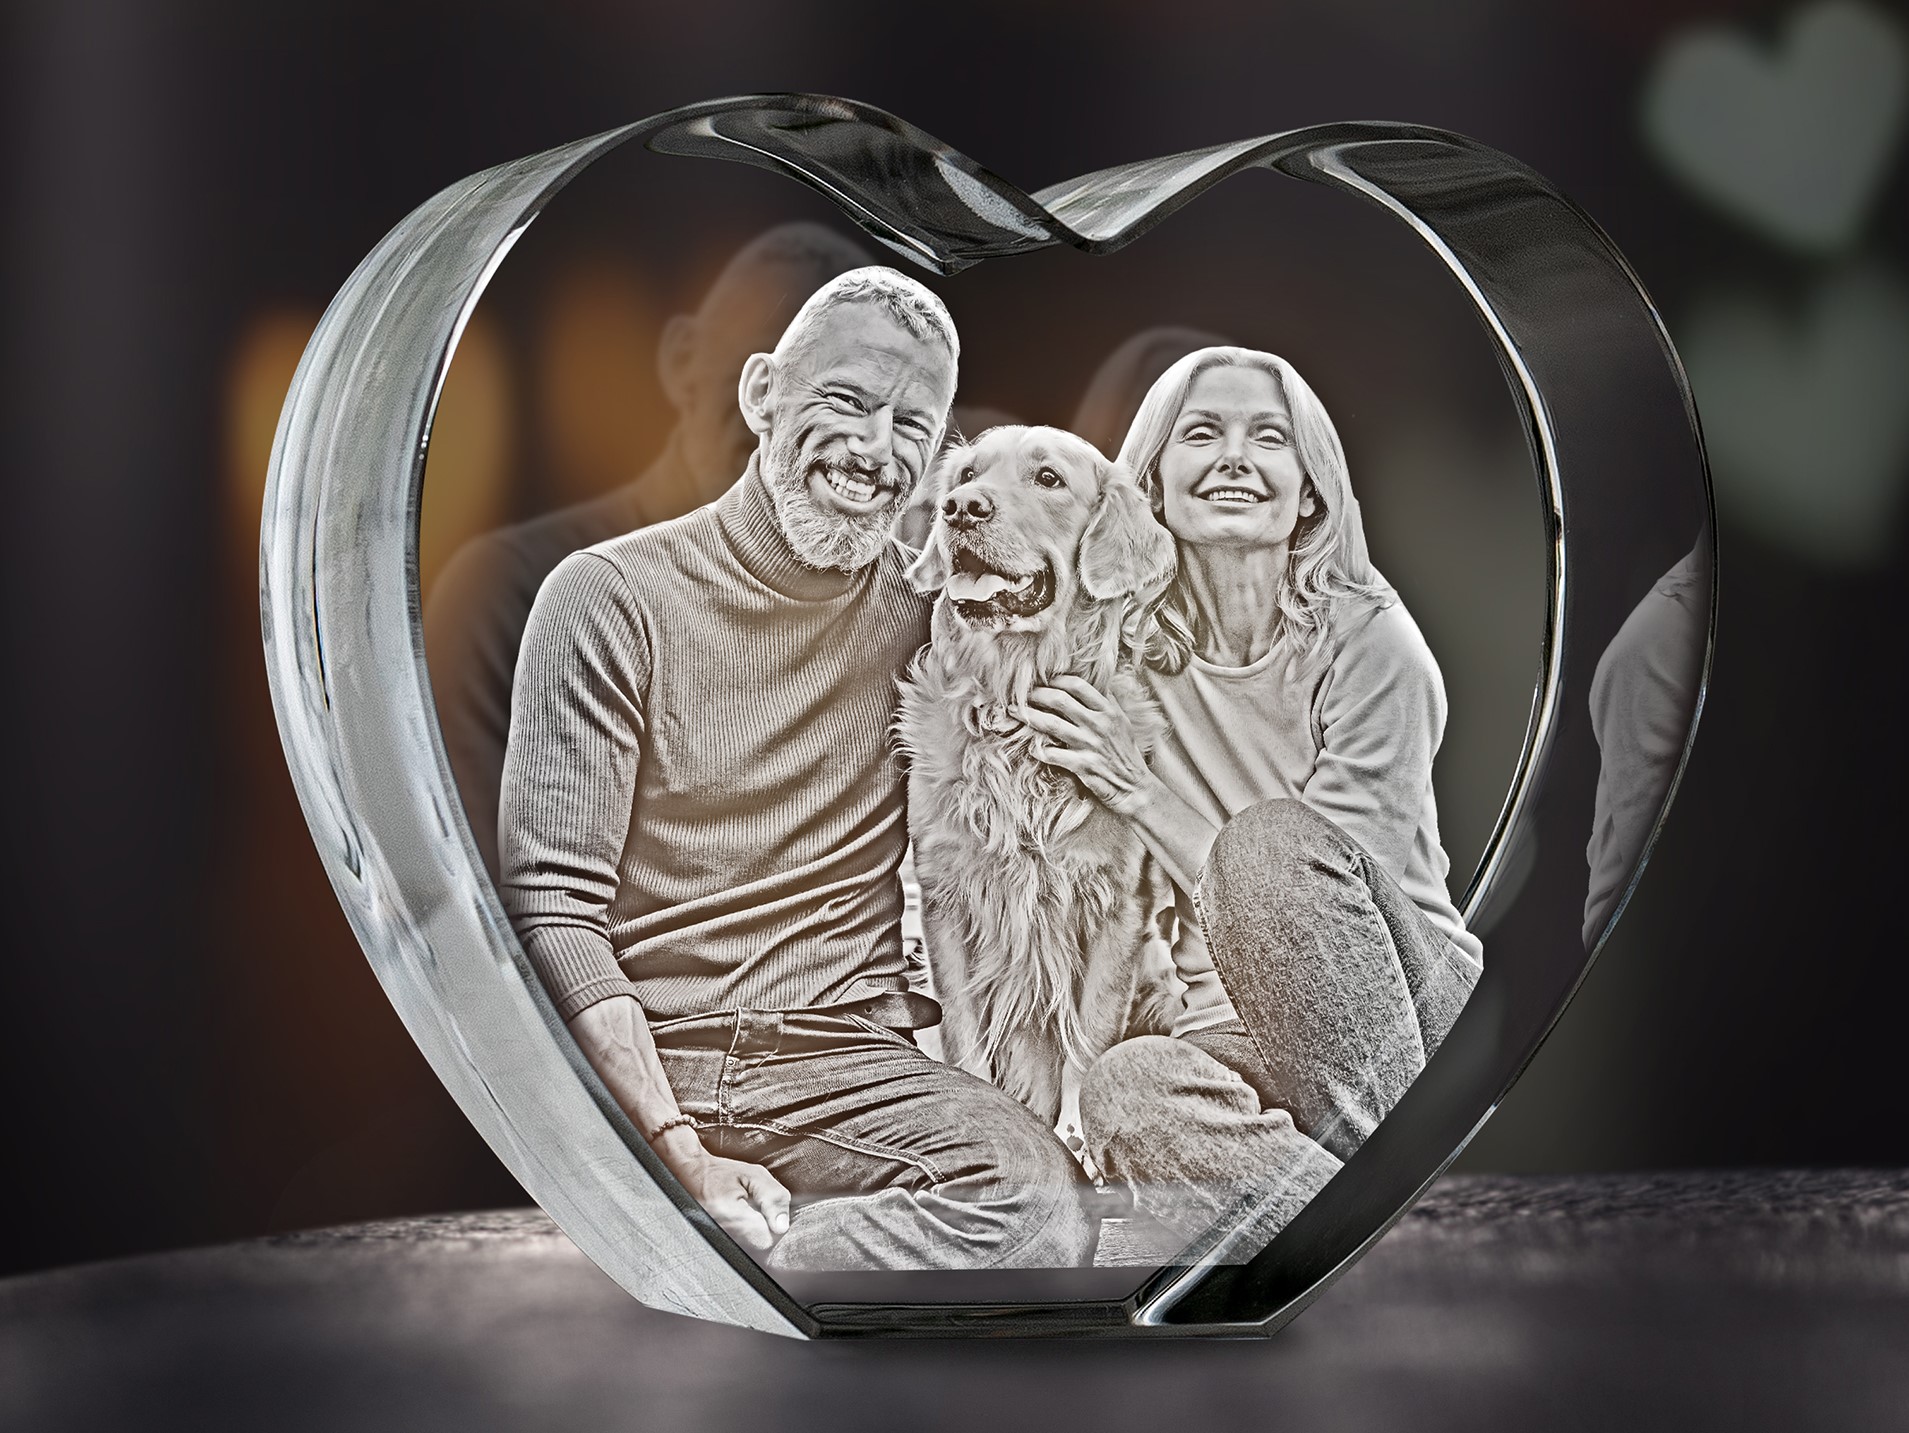 A sweet family photo engraved inside a heart-shaped crystal makes a lovely gift.